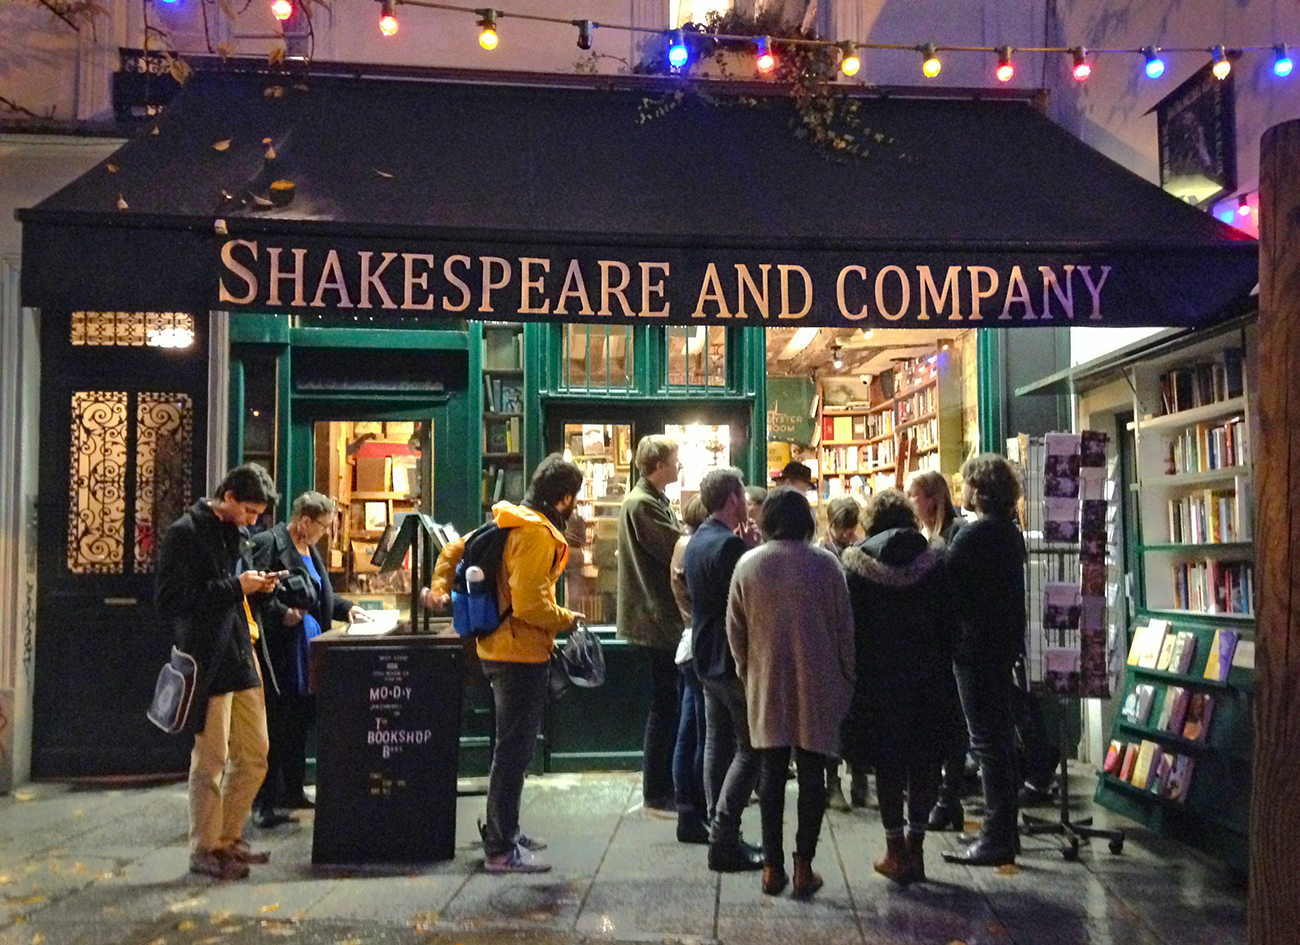 Shakespeare and Company in Paris - one of Europe's most beautiful bookshops